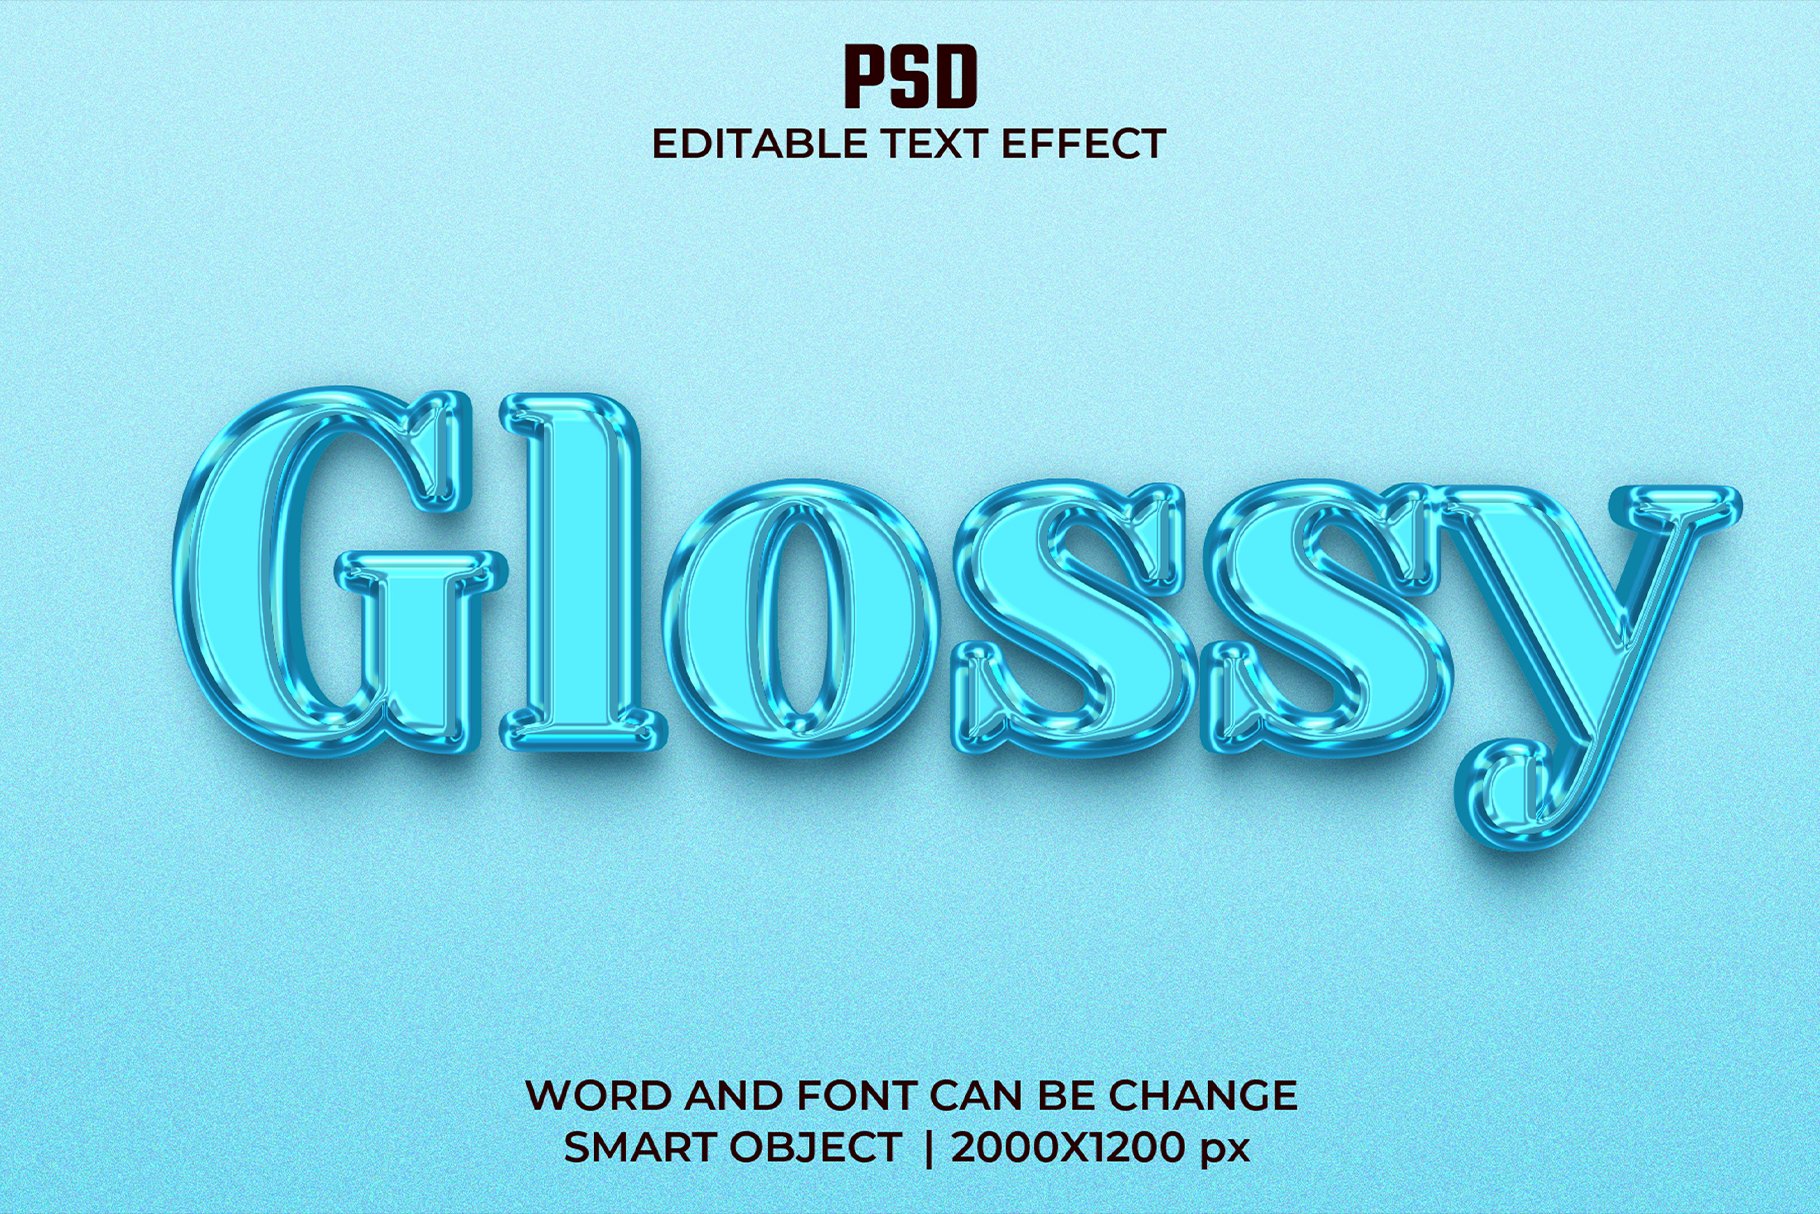 Glossy 3d Editable Psd Text Effectcover image.